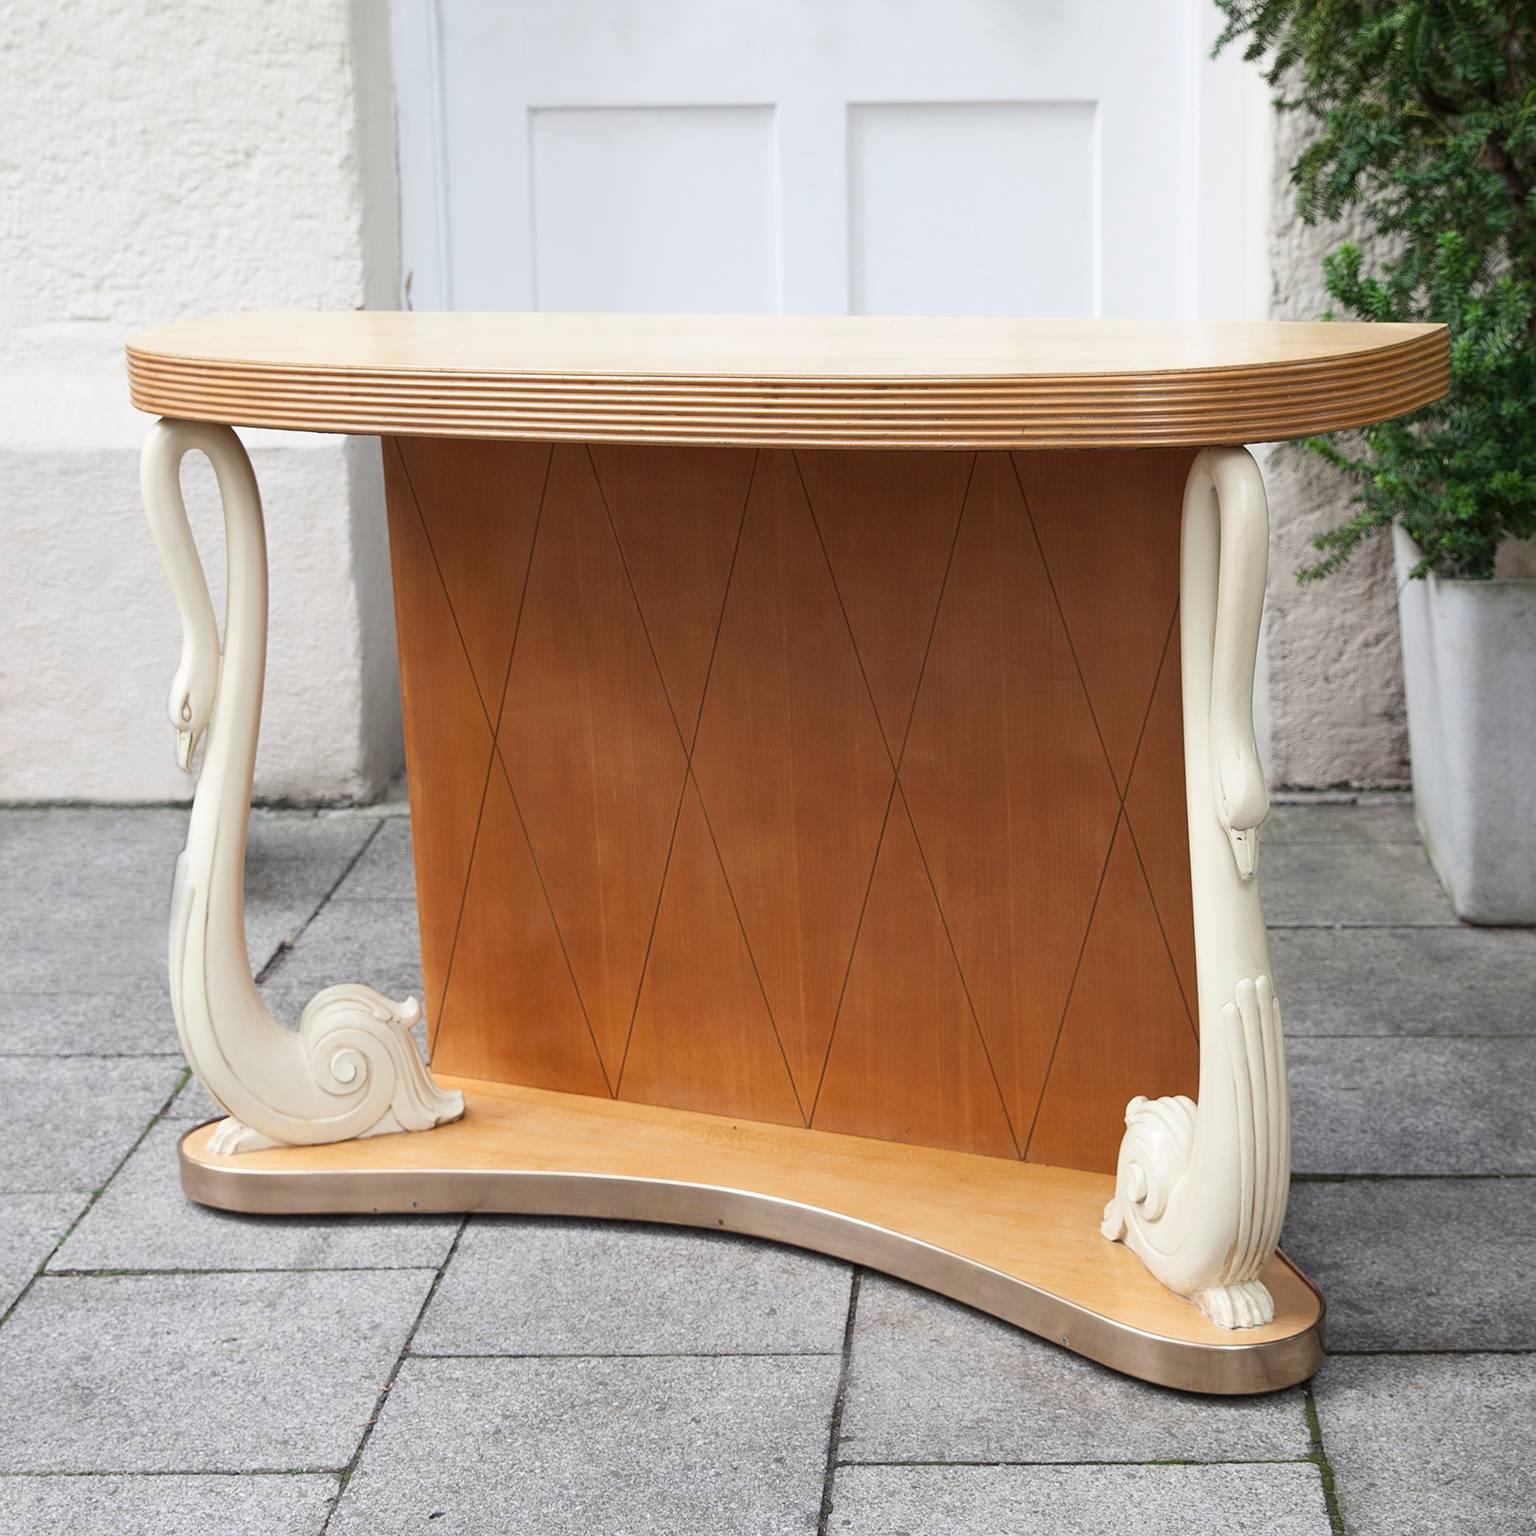 Italian console table, attributed to Osvaldo Borsani. Typical S-shaped swan legs on a semi-circular birchwood stand and top.

Measures: H 82, W 116, D 34.7 cm.